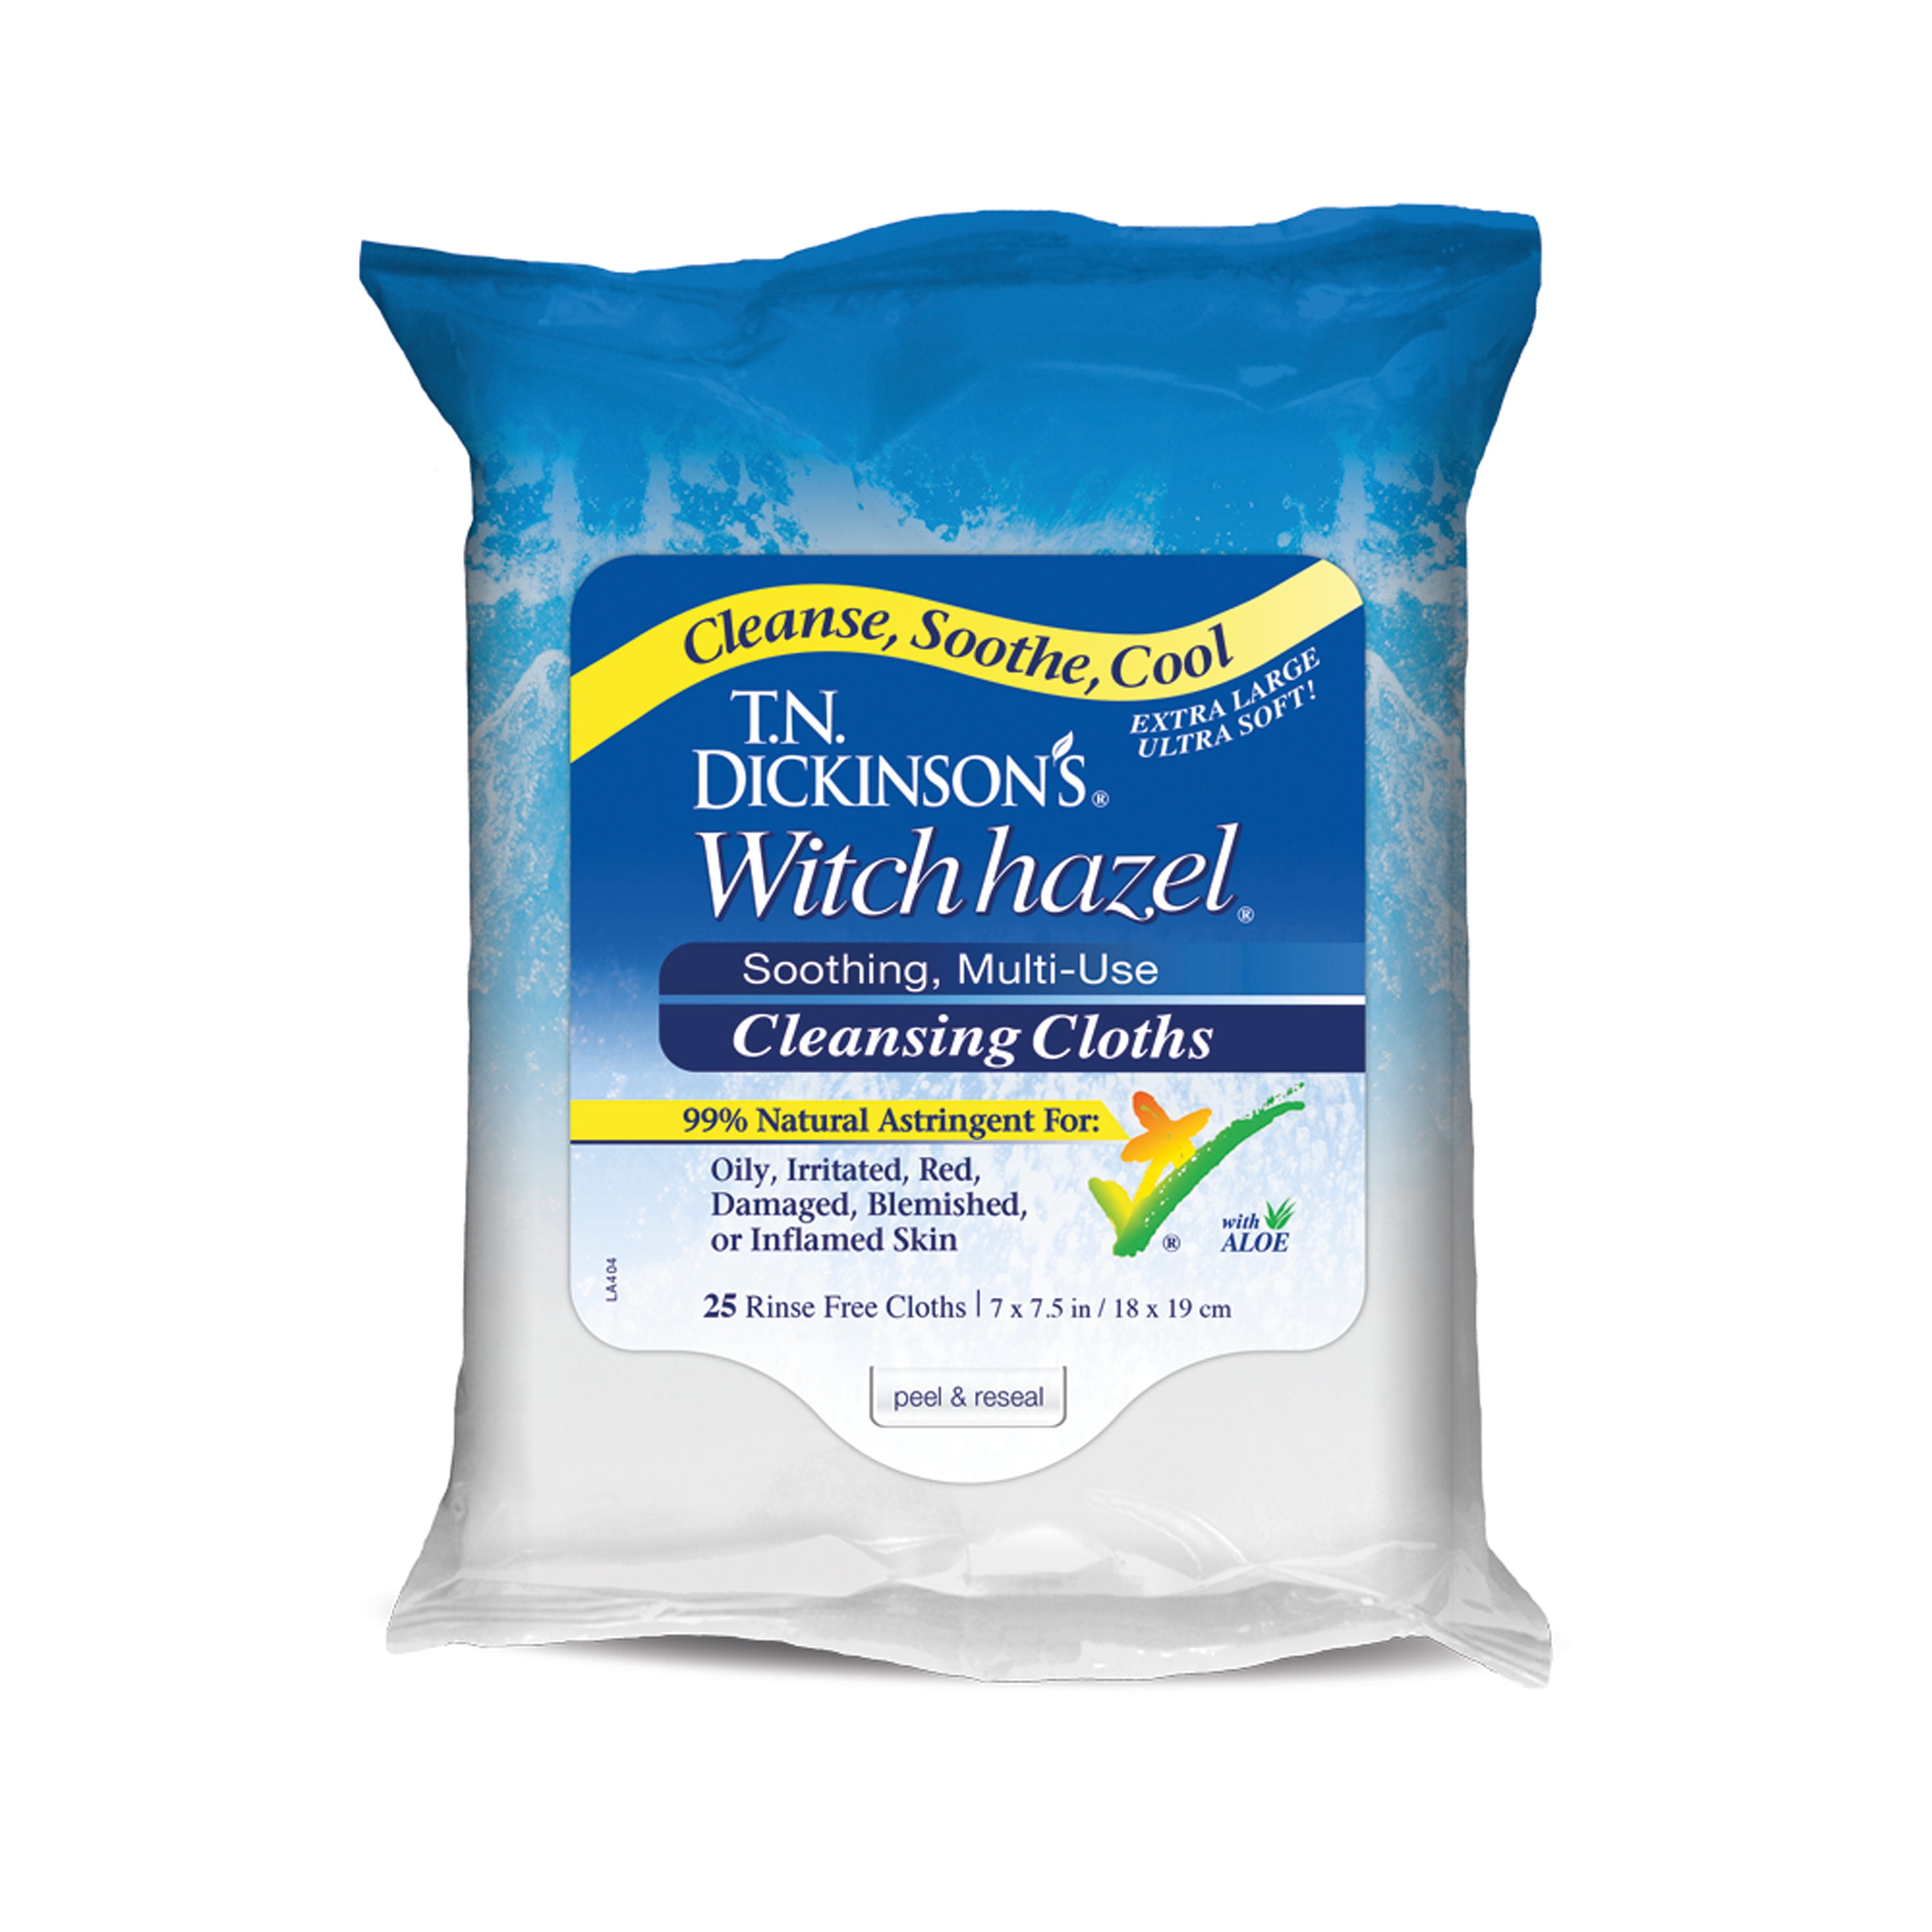 T.N. Dickinson's Witch Hazel Cleansing Cloths for Multi-Use Cleaning, 100% Natural, 25 Count